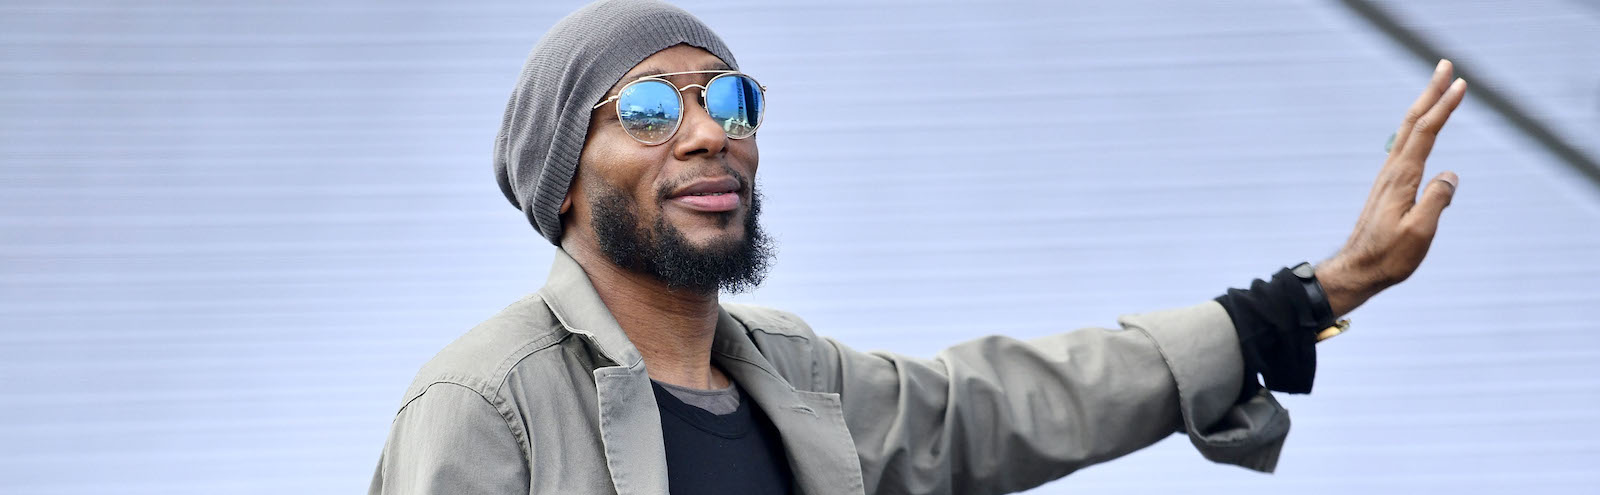 Yasiin Bey, Formerly Known as Mos Def, to Portray Thelonious Monk in Biopic  —